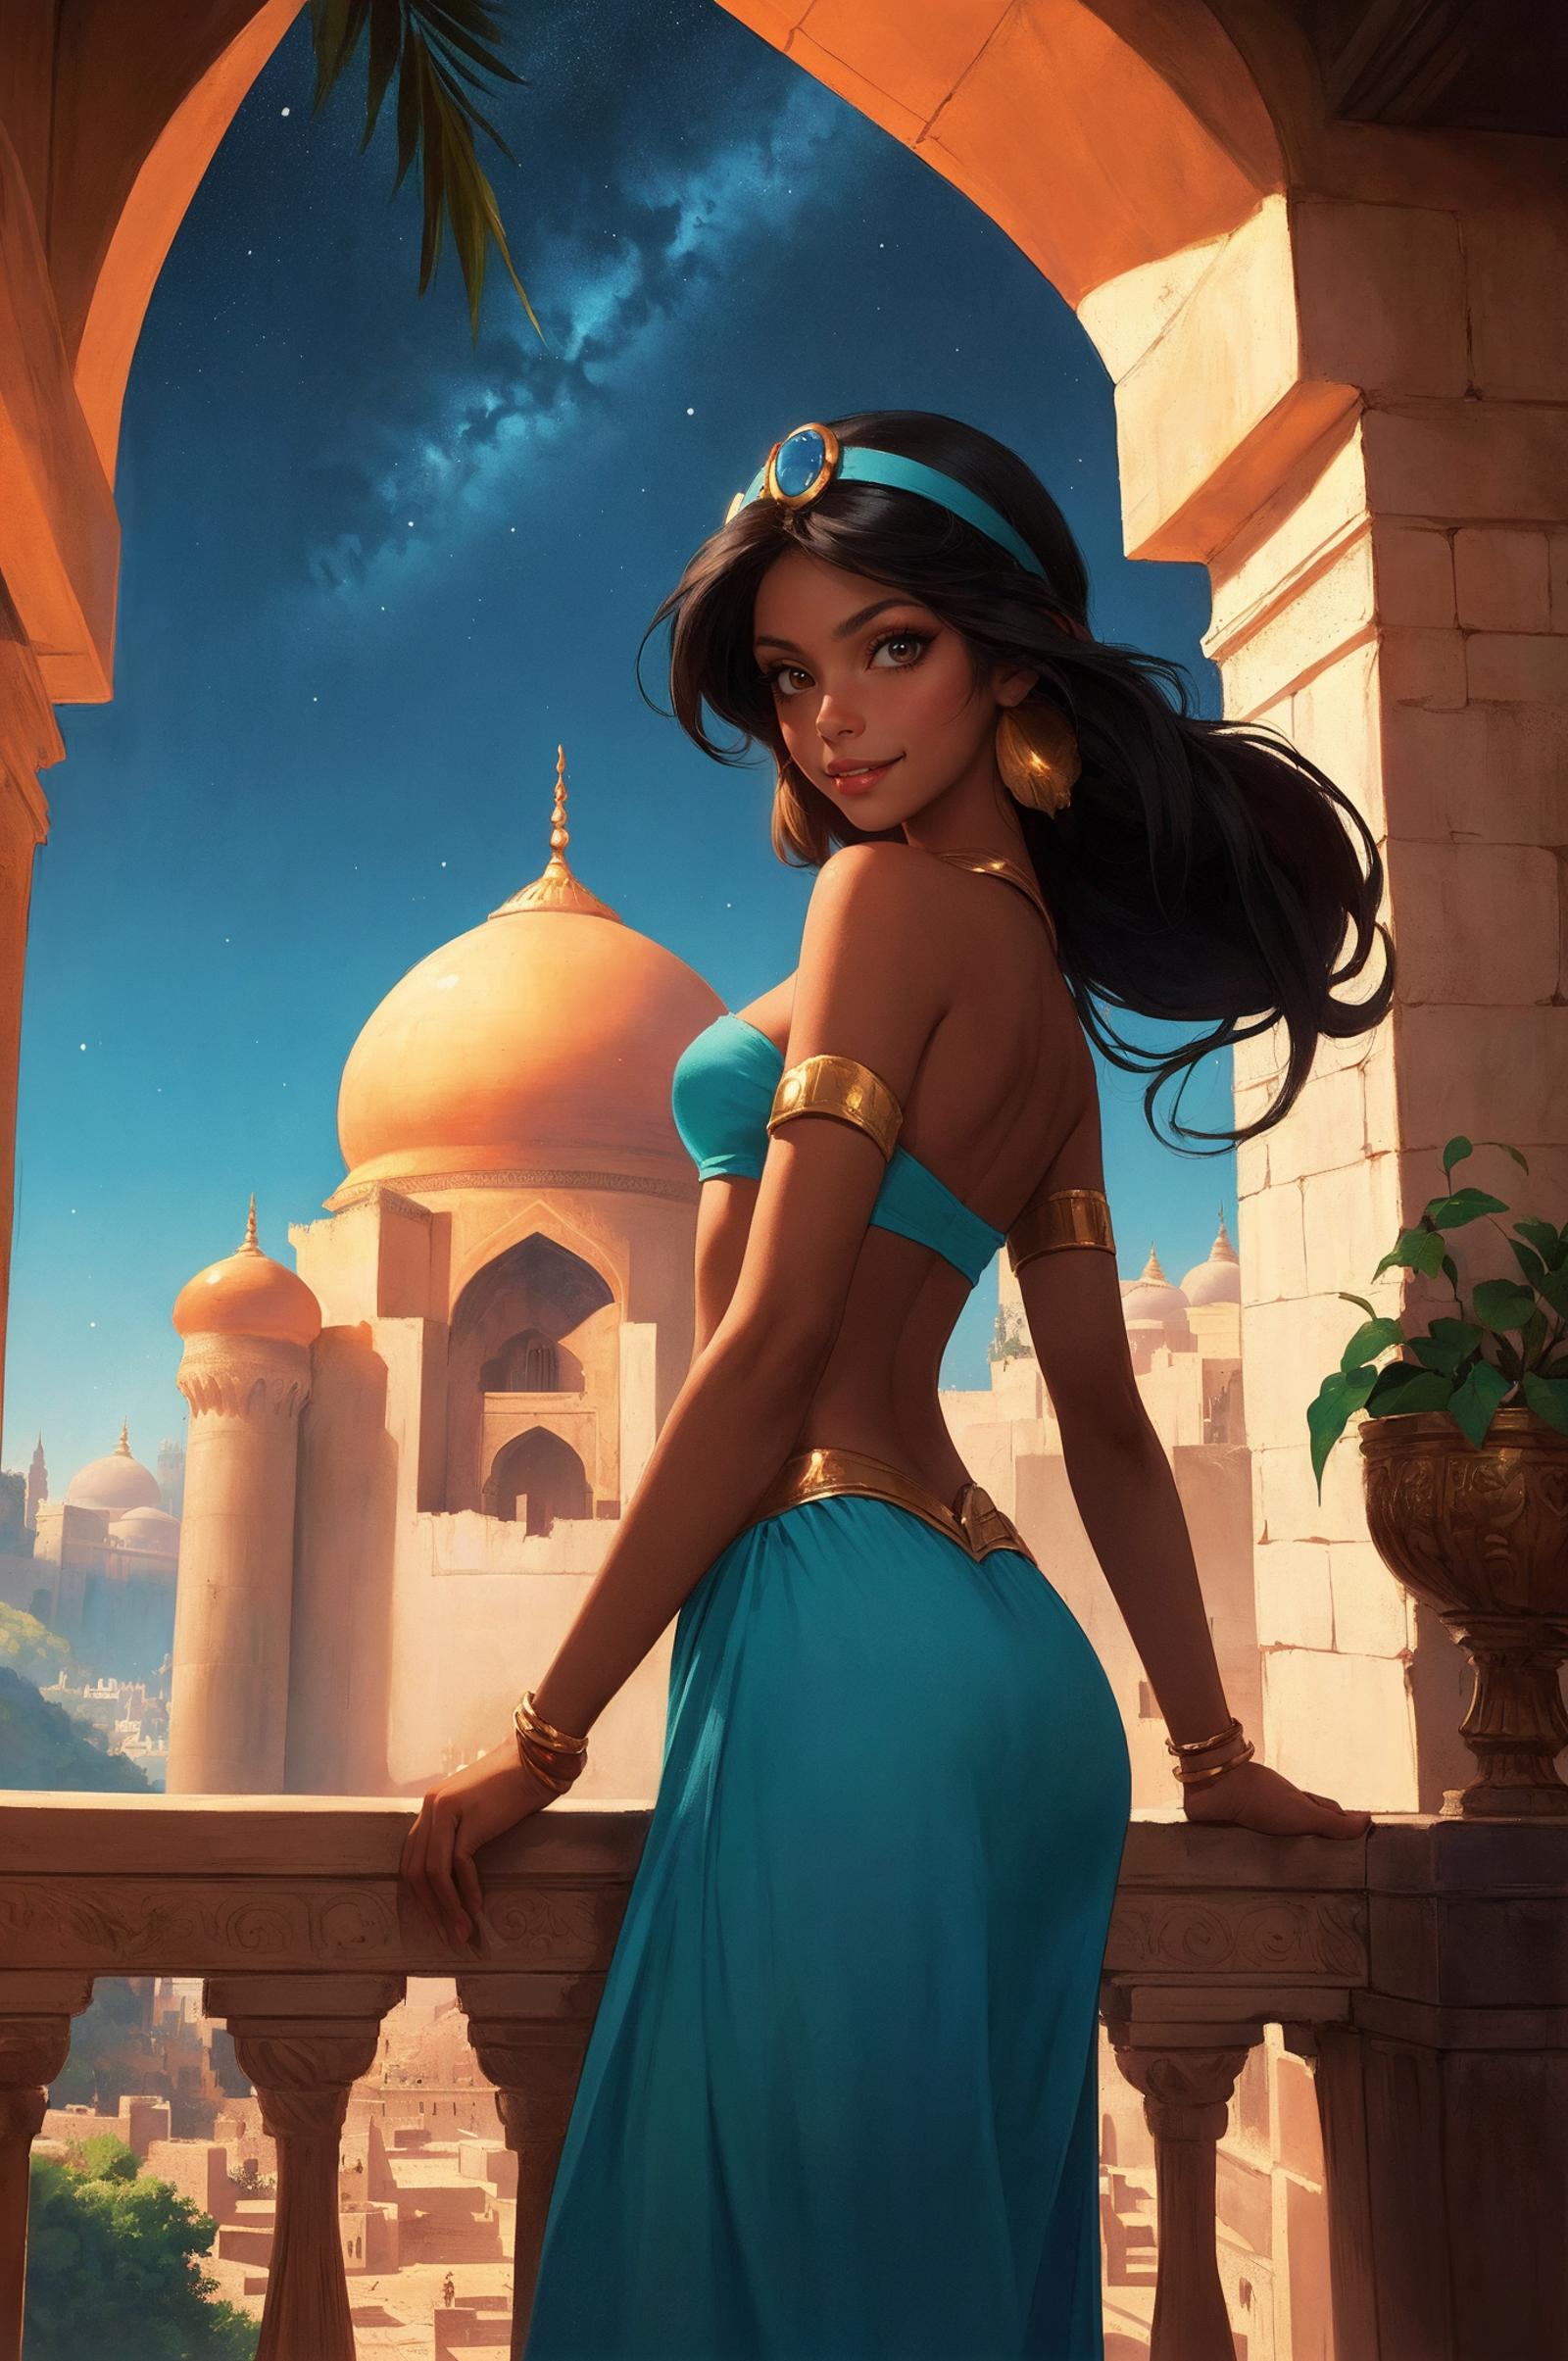 Jasmine image by Artificial_Lion